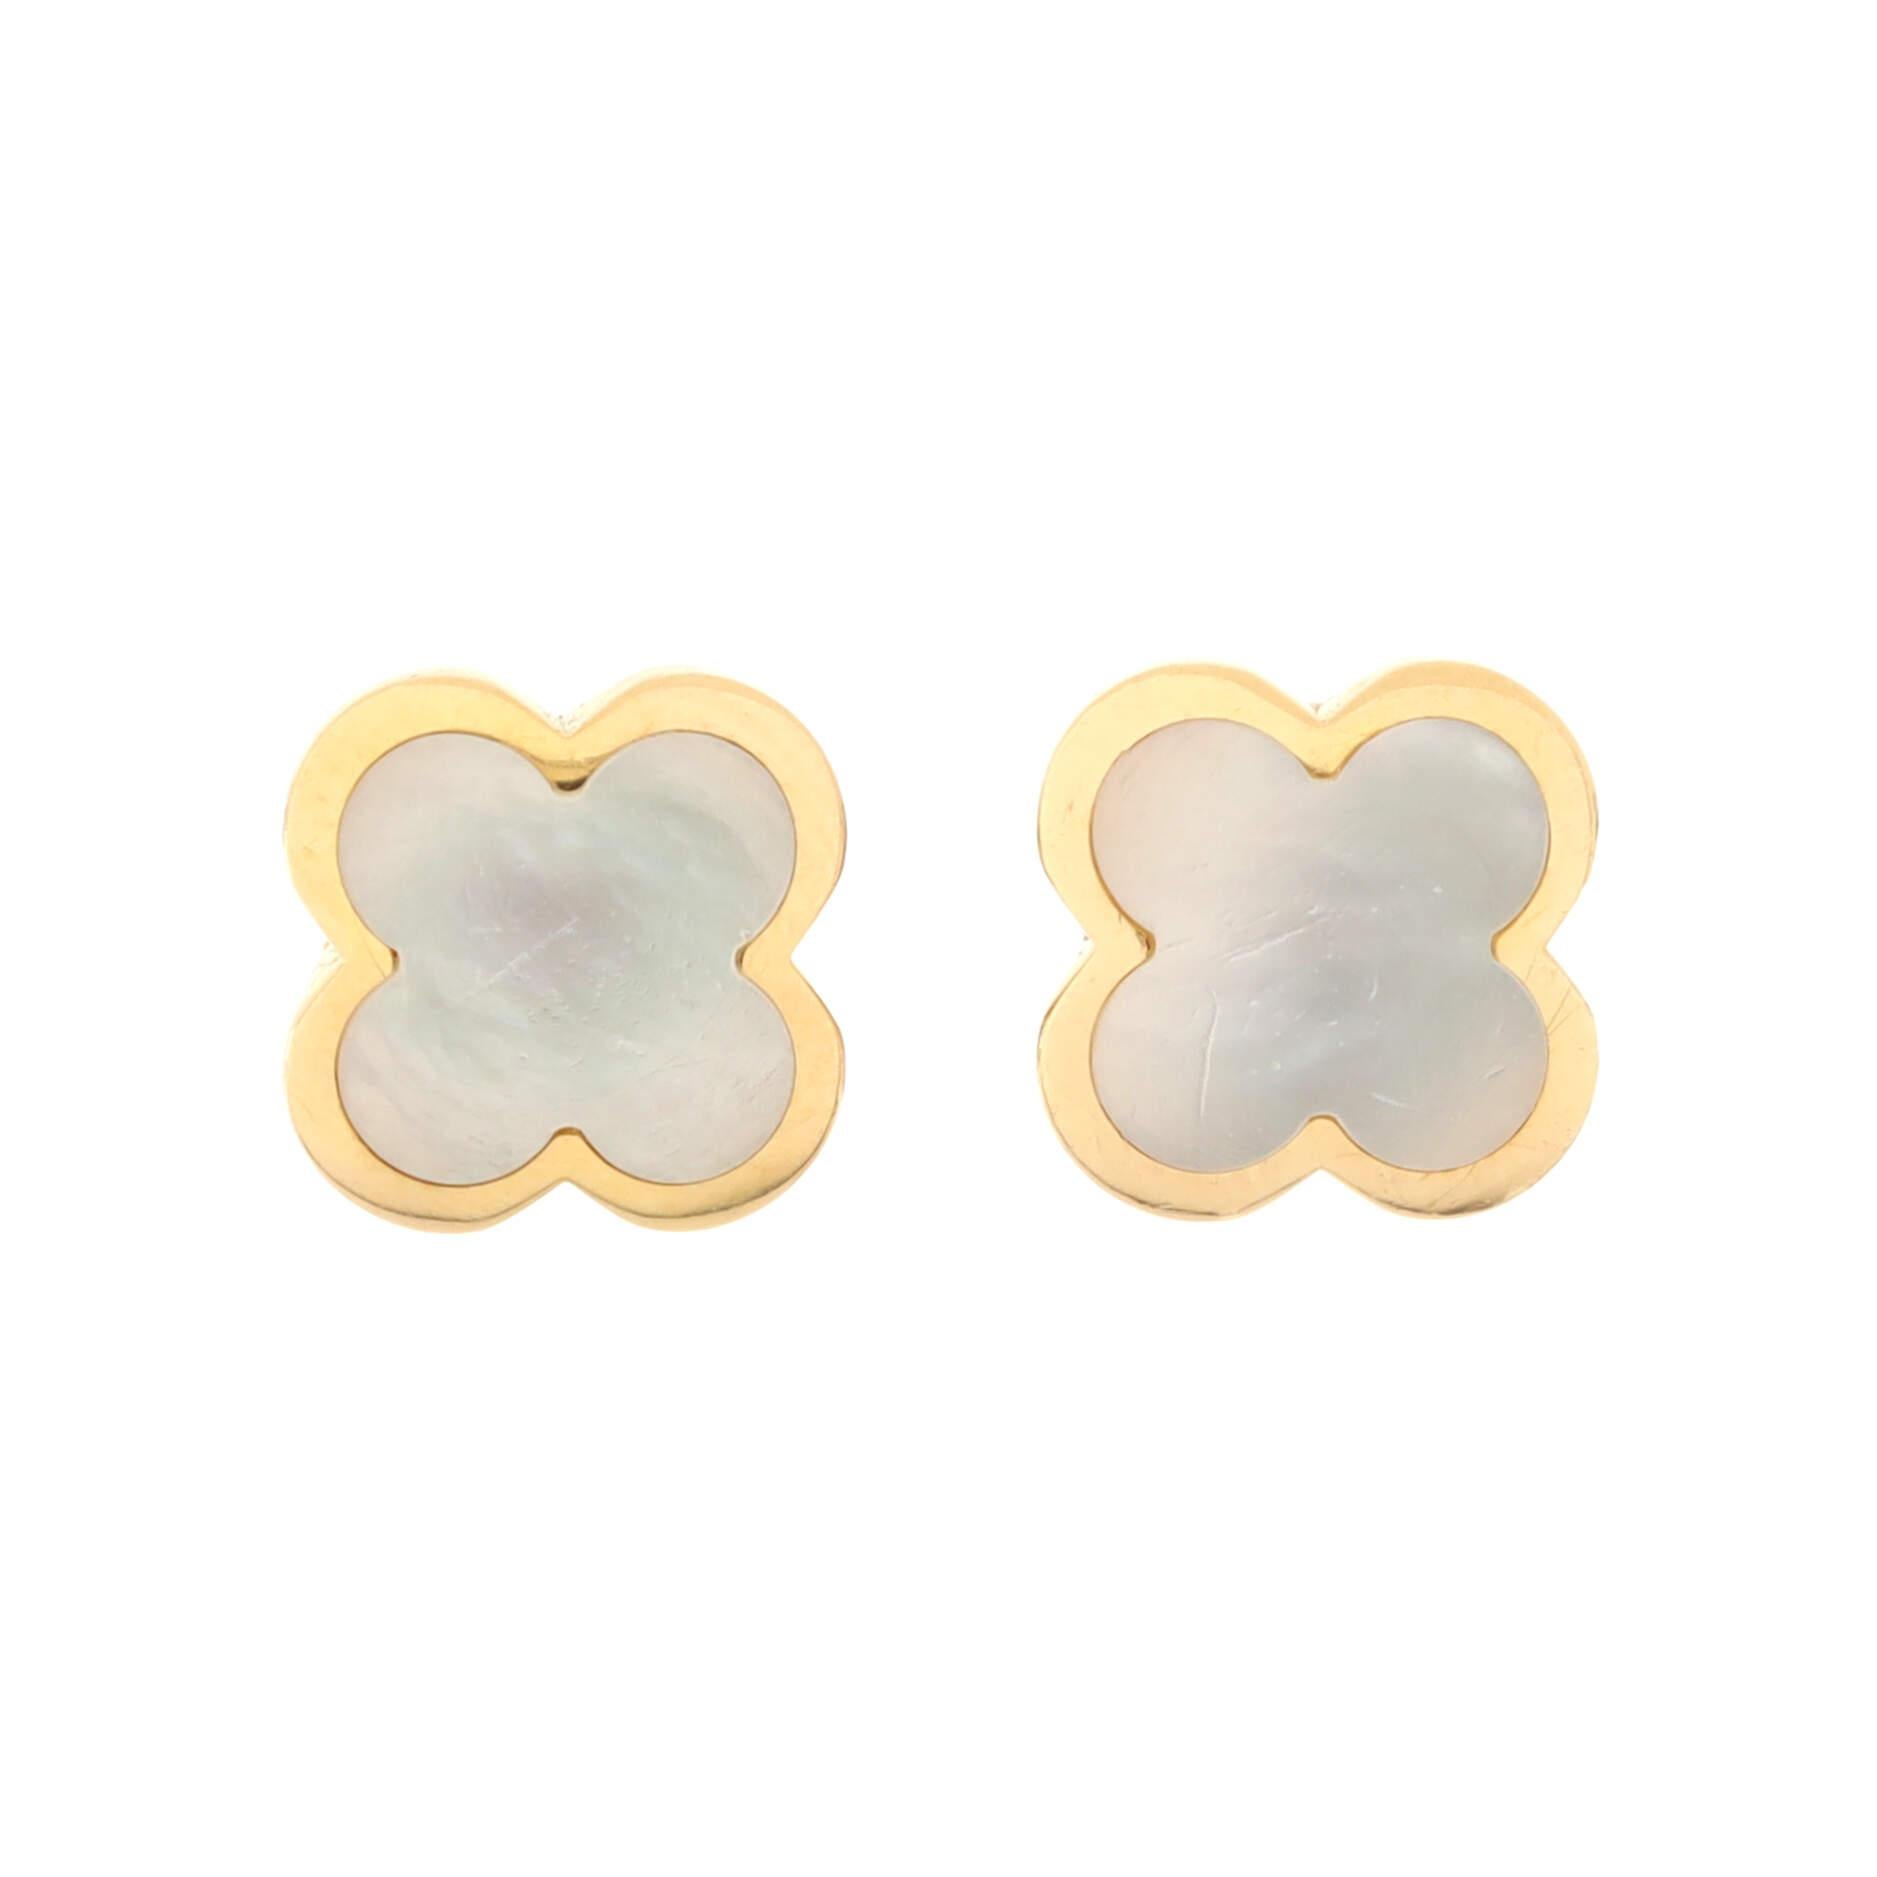 Condition: Good. Moderate wear throughout with dulling to the mother of pearl.
Accessories: No Accessories
Measurements: Height/Length: 11.10 mm, Width: 11.10 mm
Designer: Van Cleef & Arpels
Model: Pure Alhambra Stud Earrings 18K Yellow Gold and